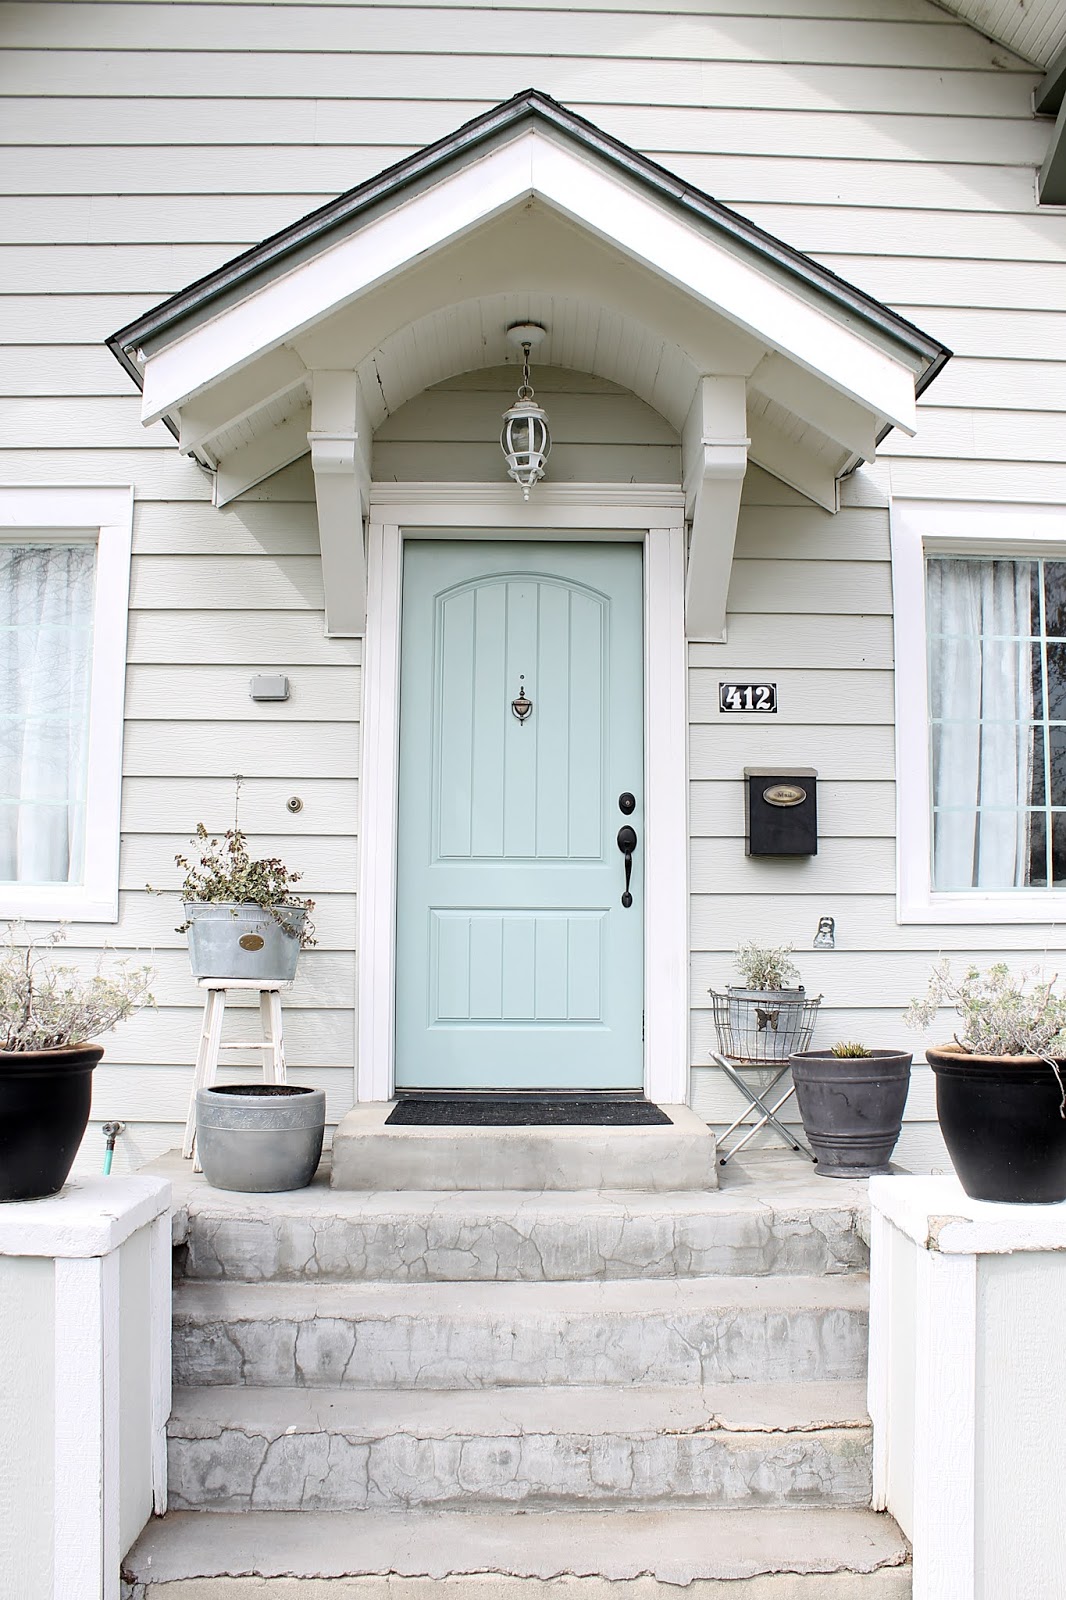 New Door Color - Wythe Blue - The Wicker House